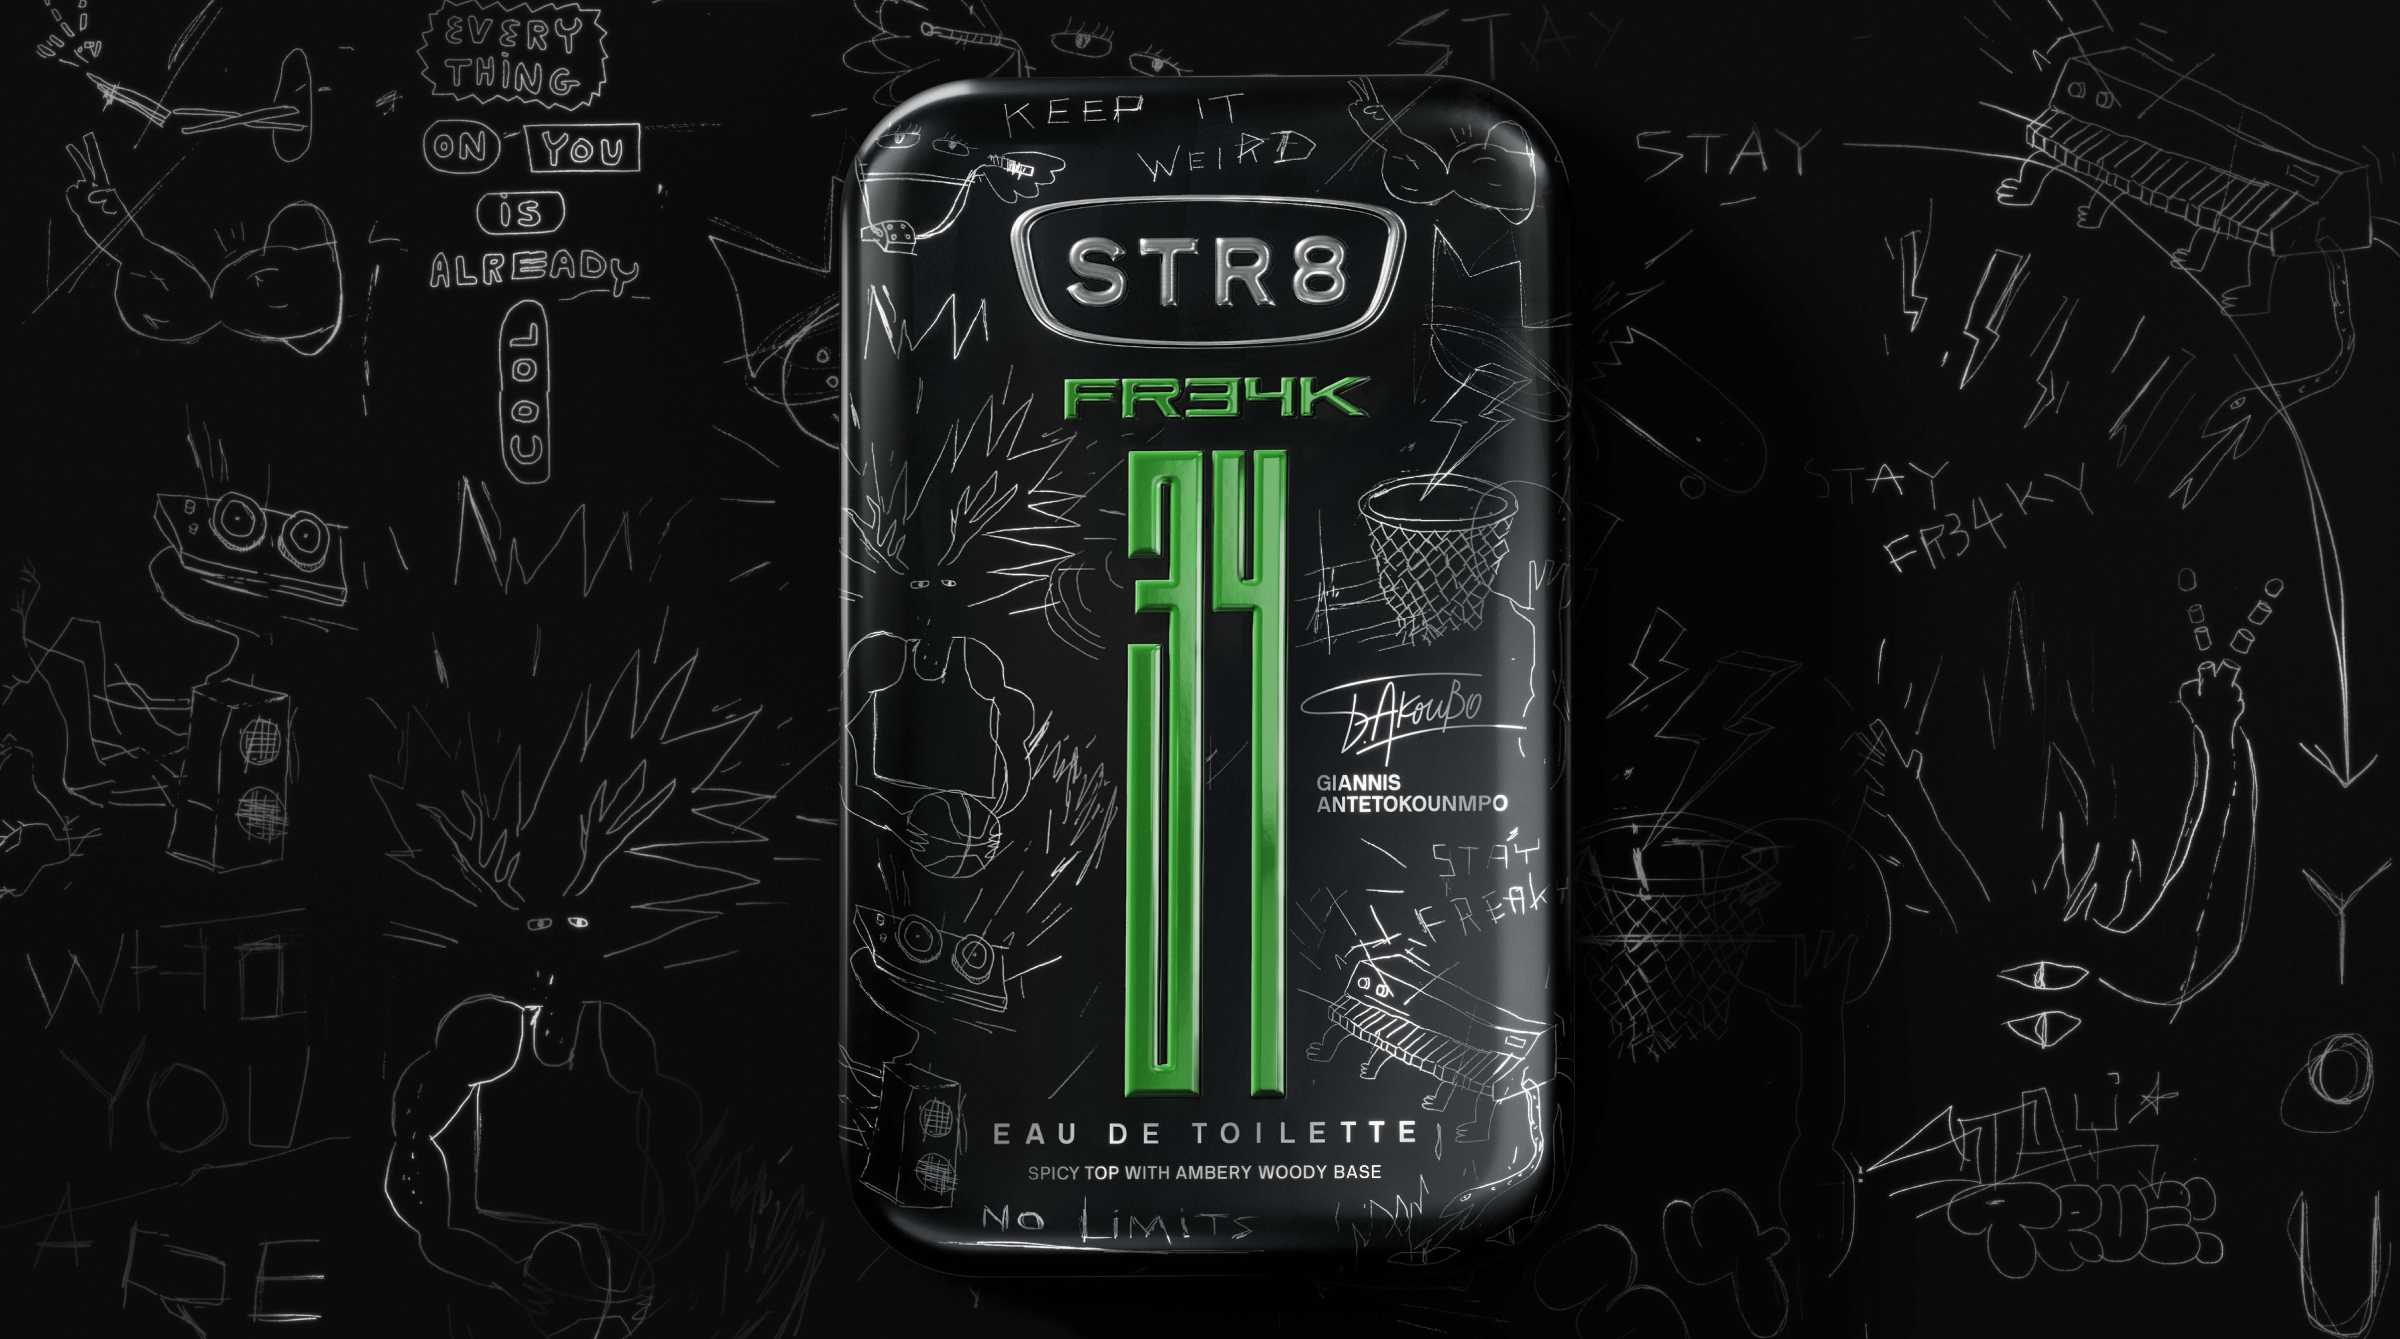 The Signature Fragrance STR8 Teams Up with the NBA Star Giannis Antetokounmpo to Inspire Self-Identity Beyond Stereotypes